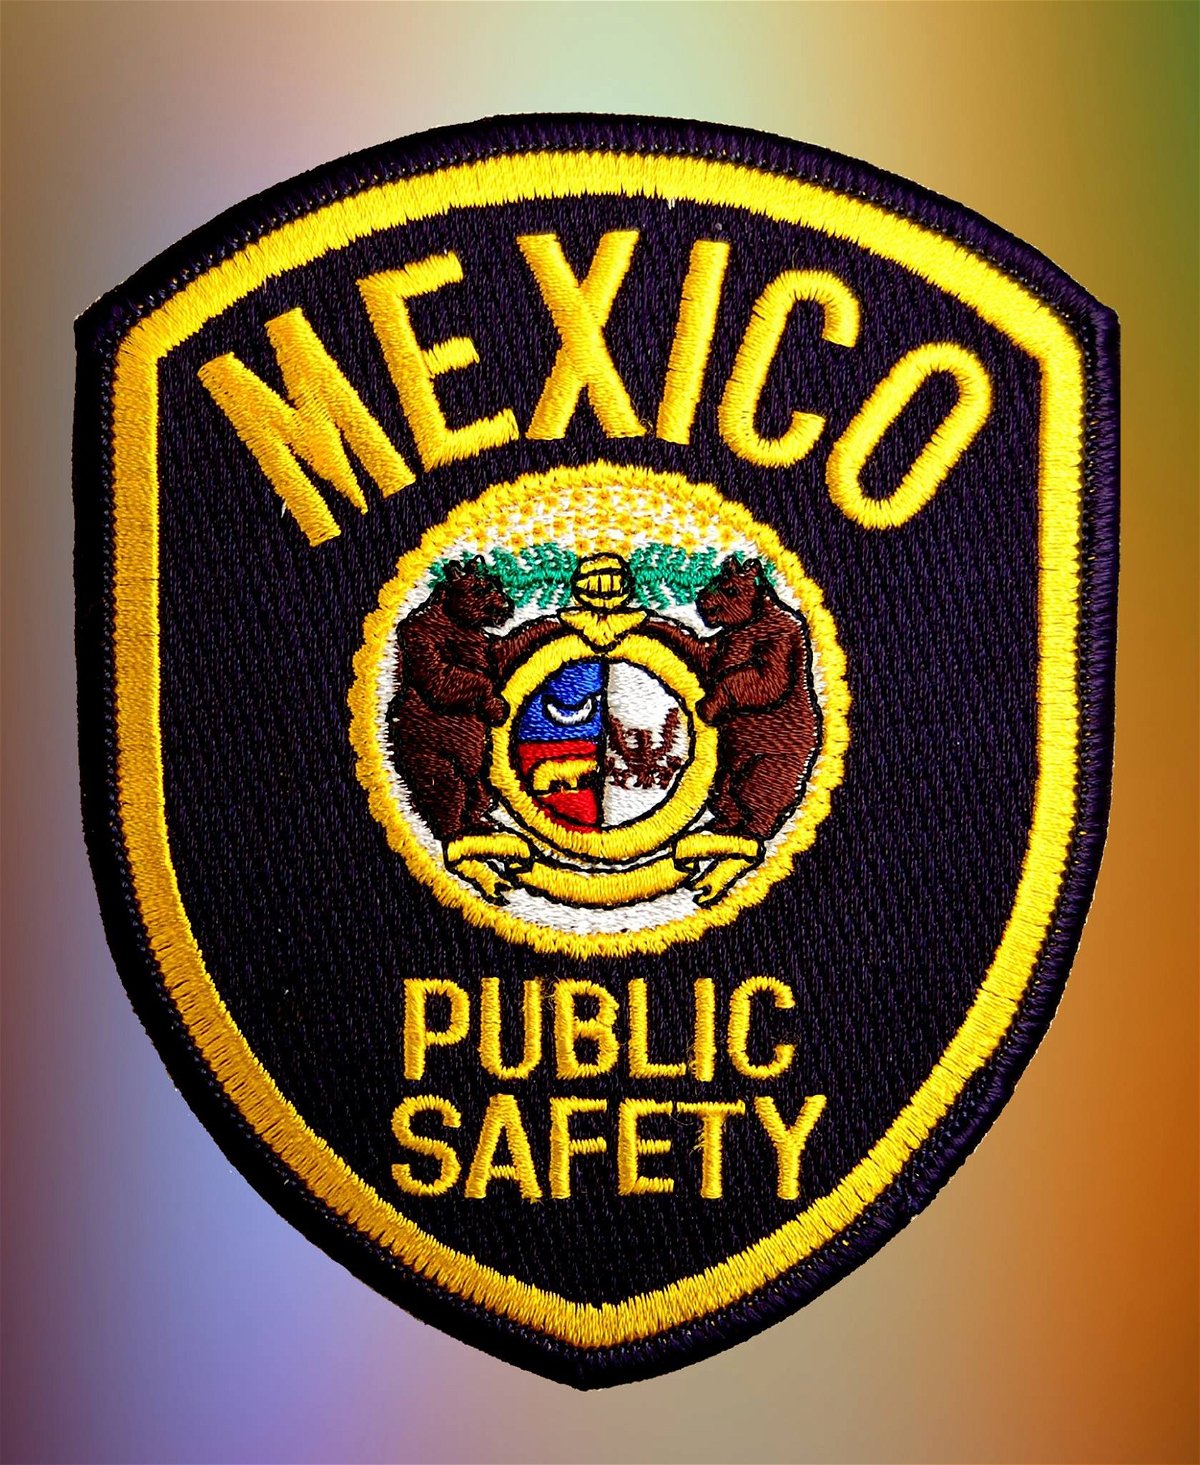 Mexico Department of Public Safety logo